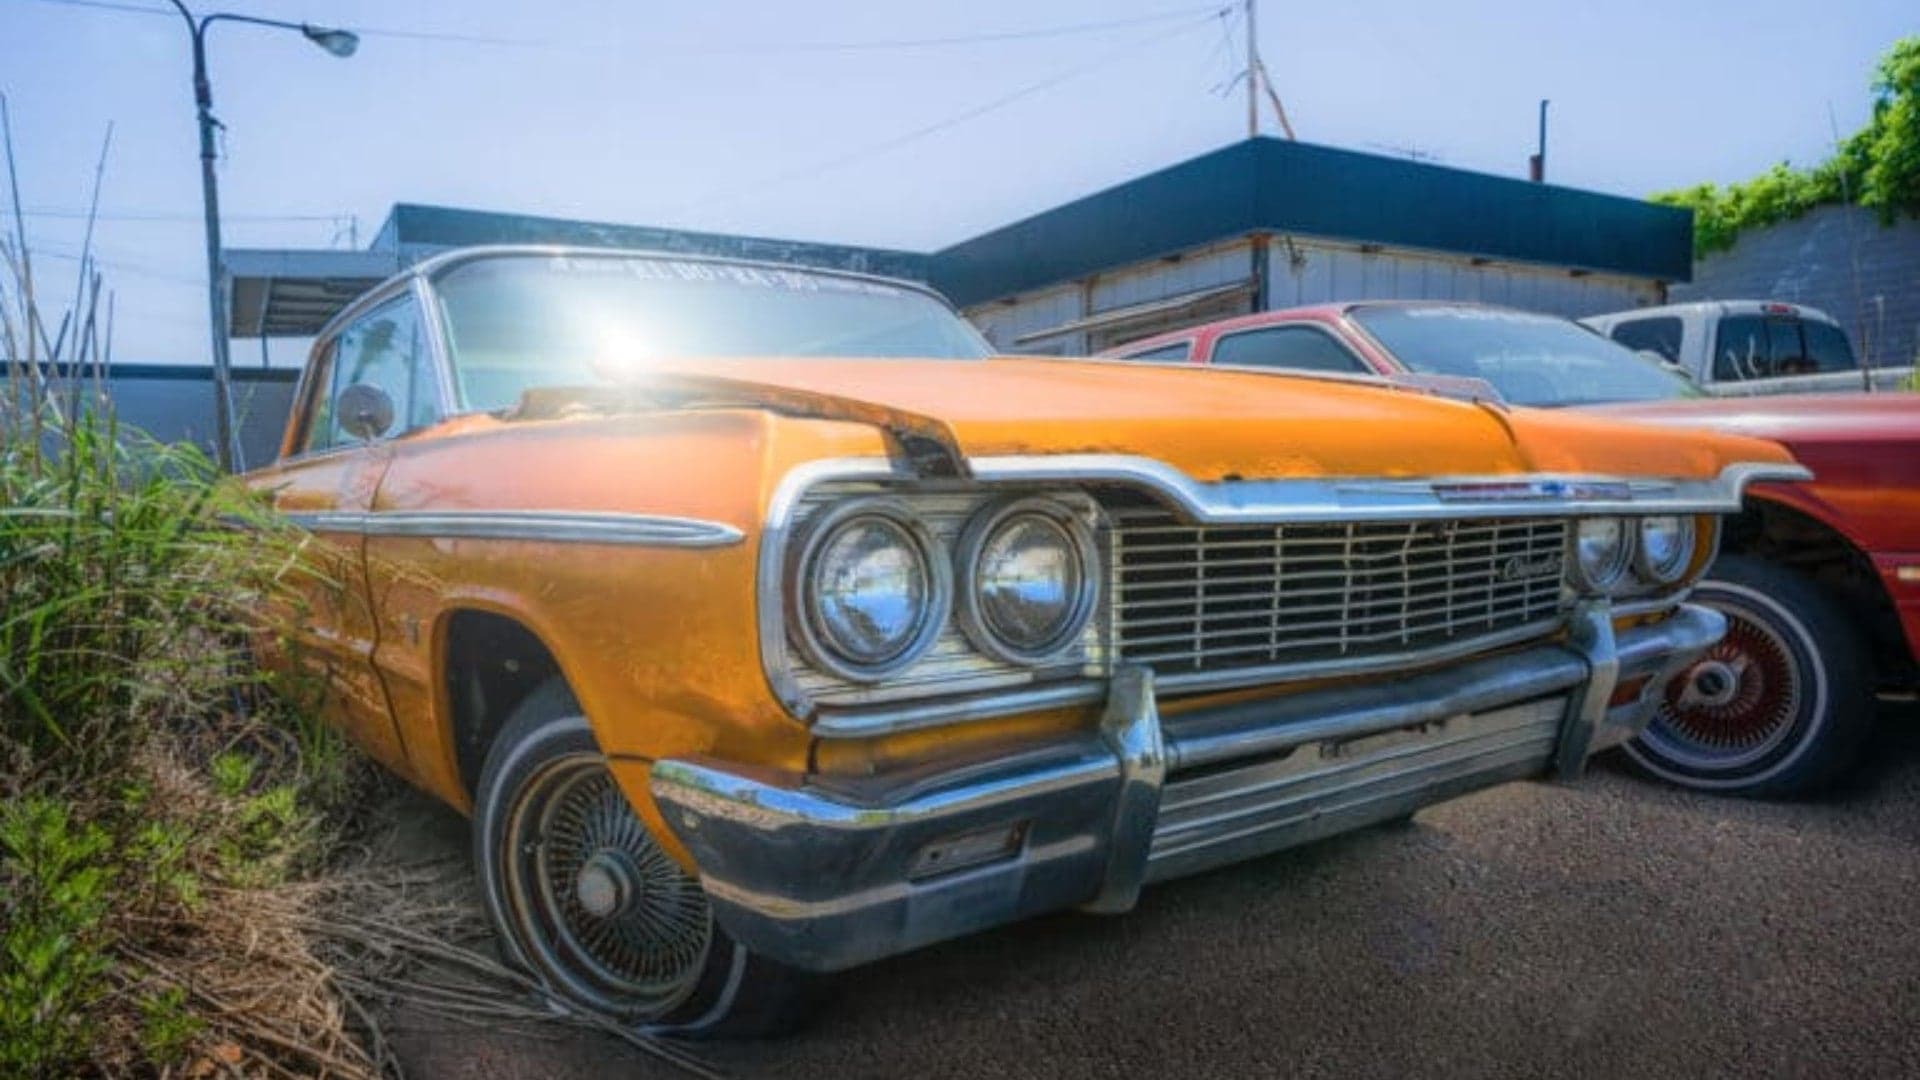 These Classic American Cars in Japan Have Been Parked Since the 2011 Fukushima Nuclear Disaster